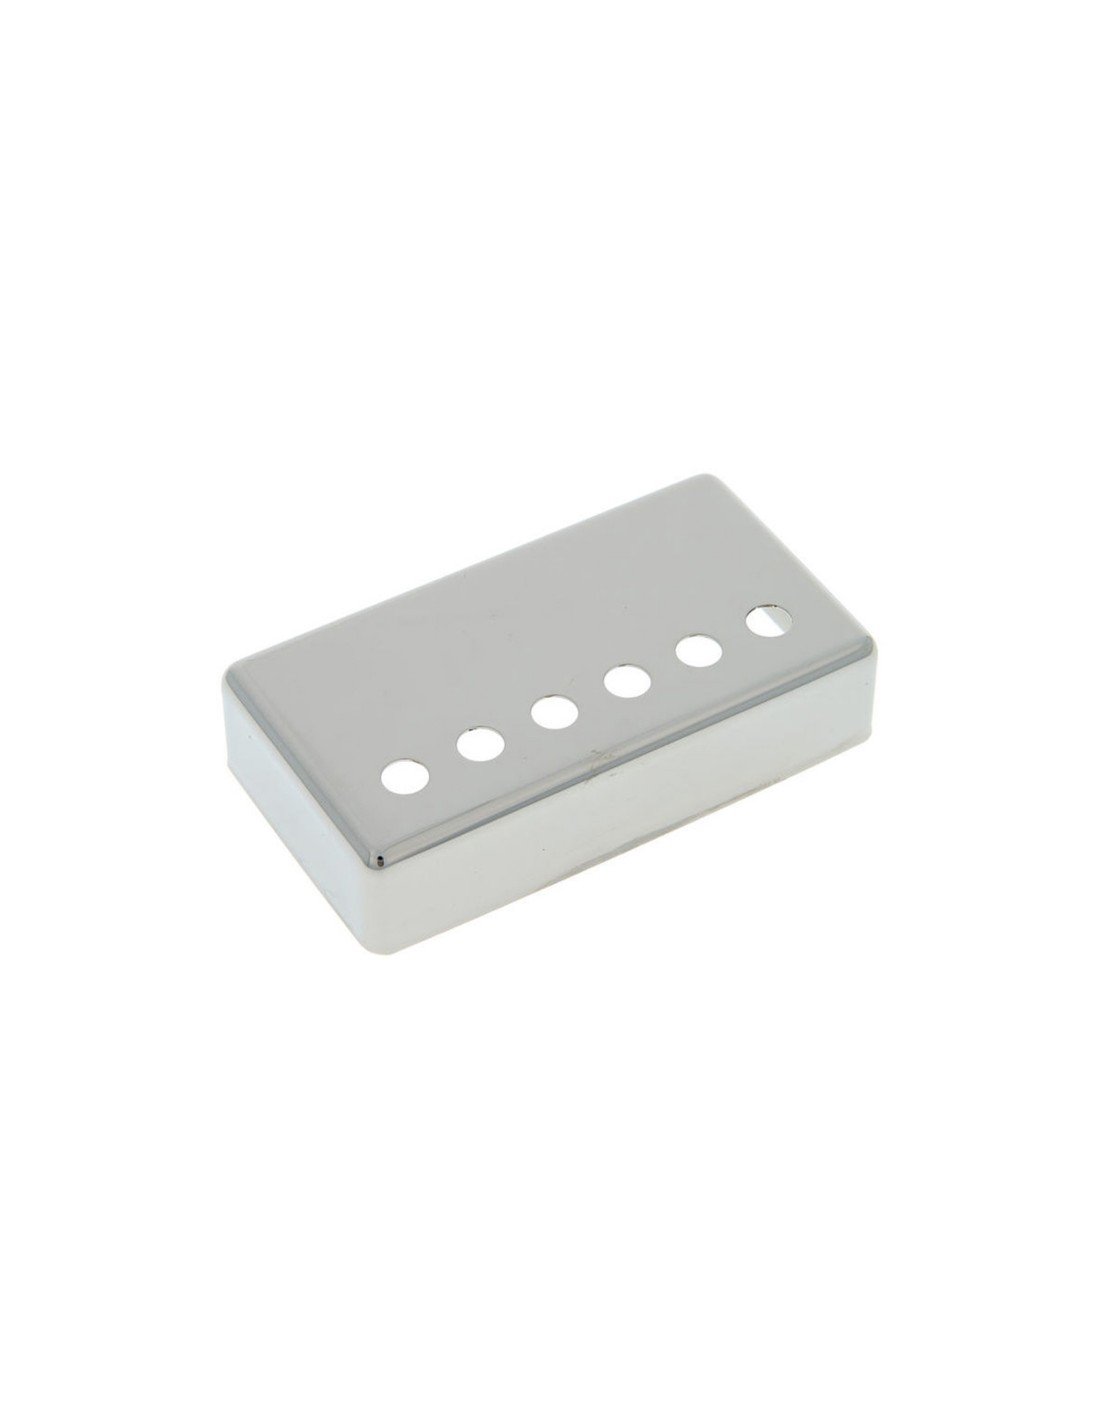 Gibson PRPC-030 Pickup Cover Neck Nickel